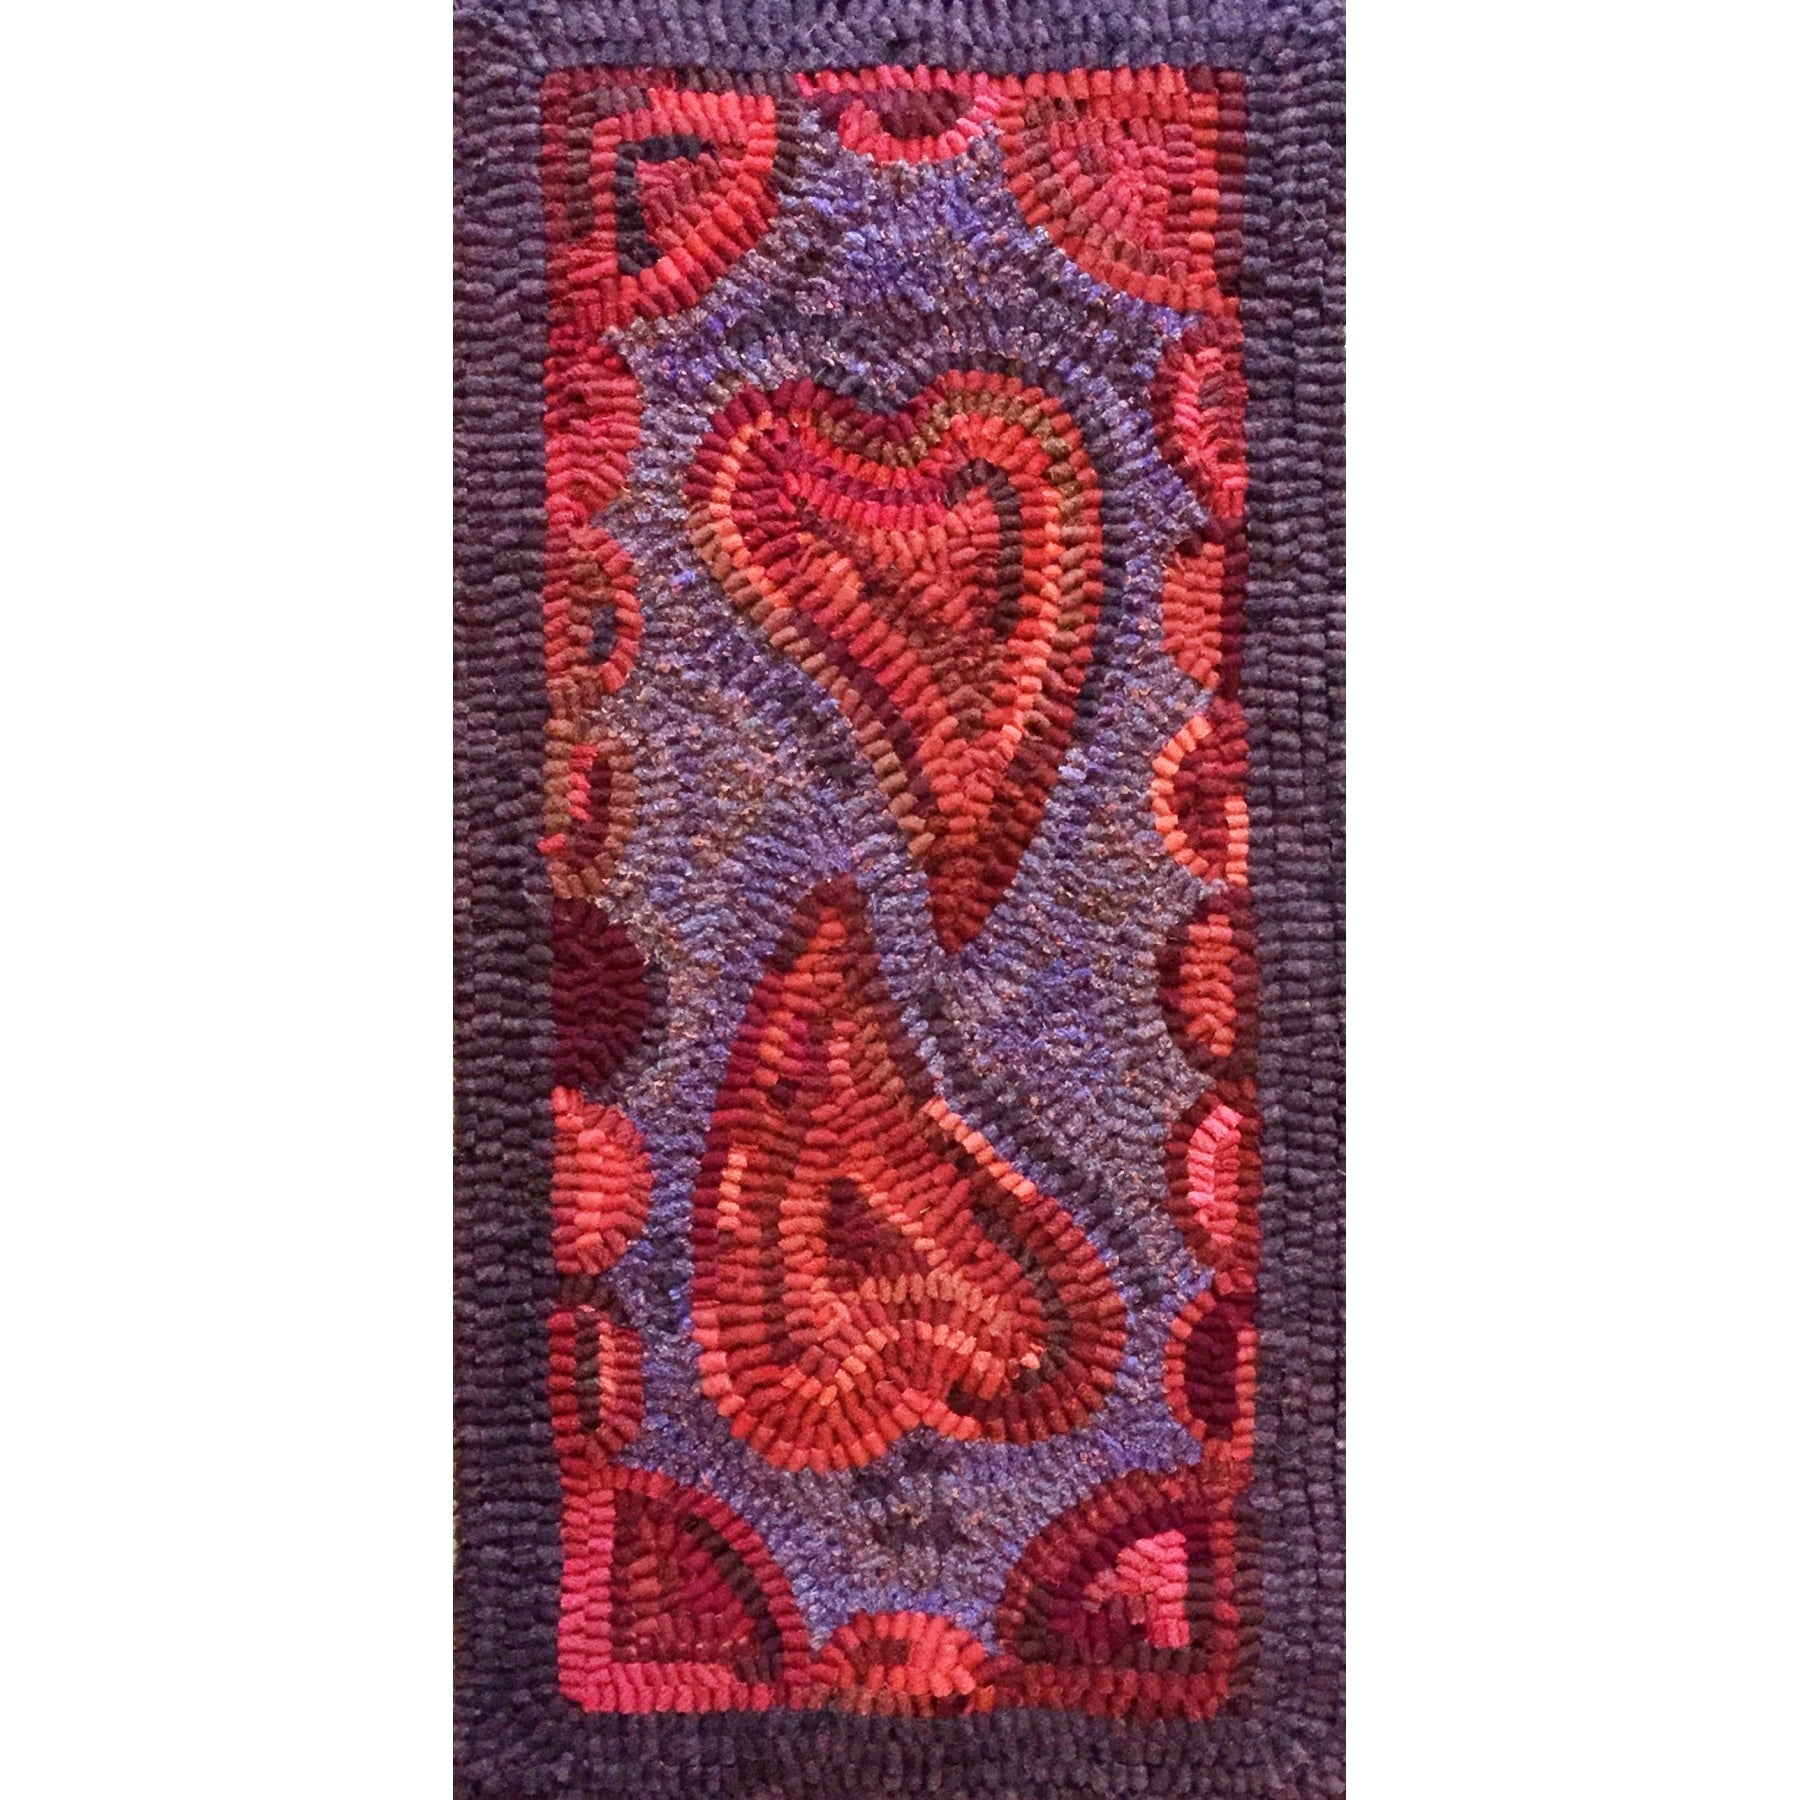 Two Hearts, rug hooked by Christa Bowling